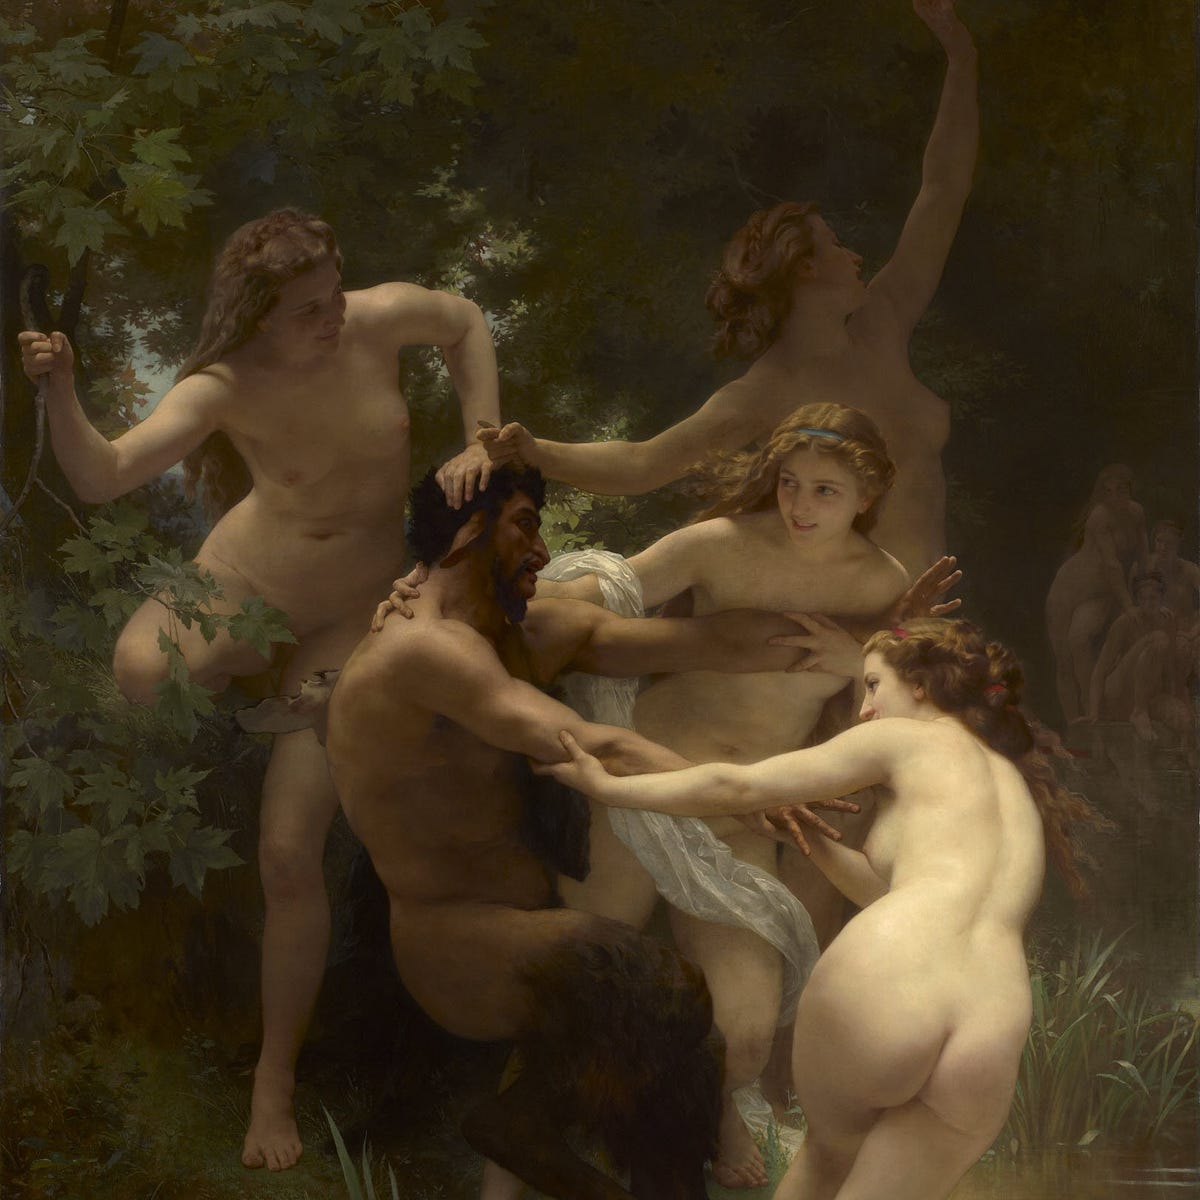 The Nymphs and Satyrs of William-Adolphe Bouguereau by Remy Dean Signifier Medium photo photo